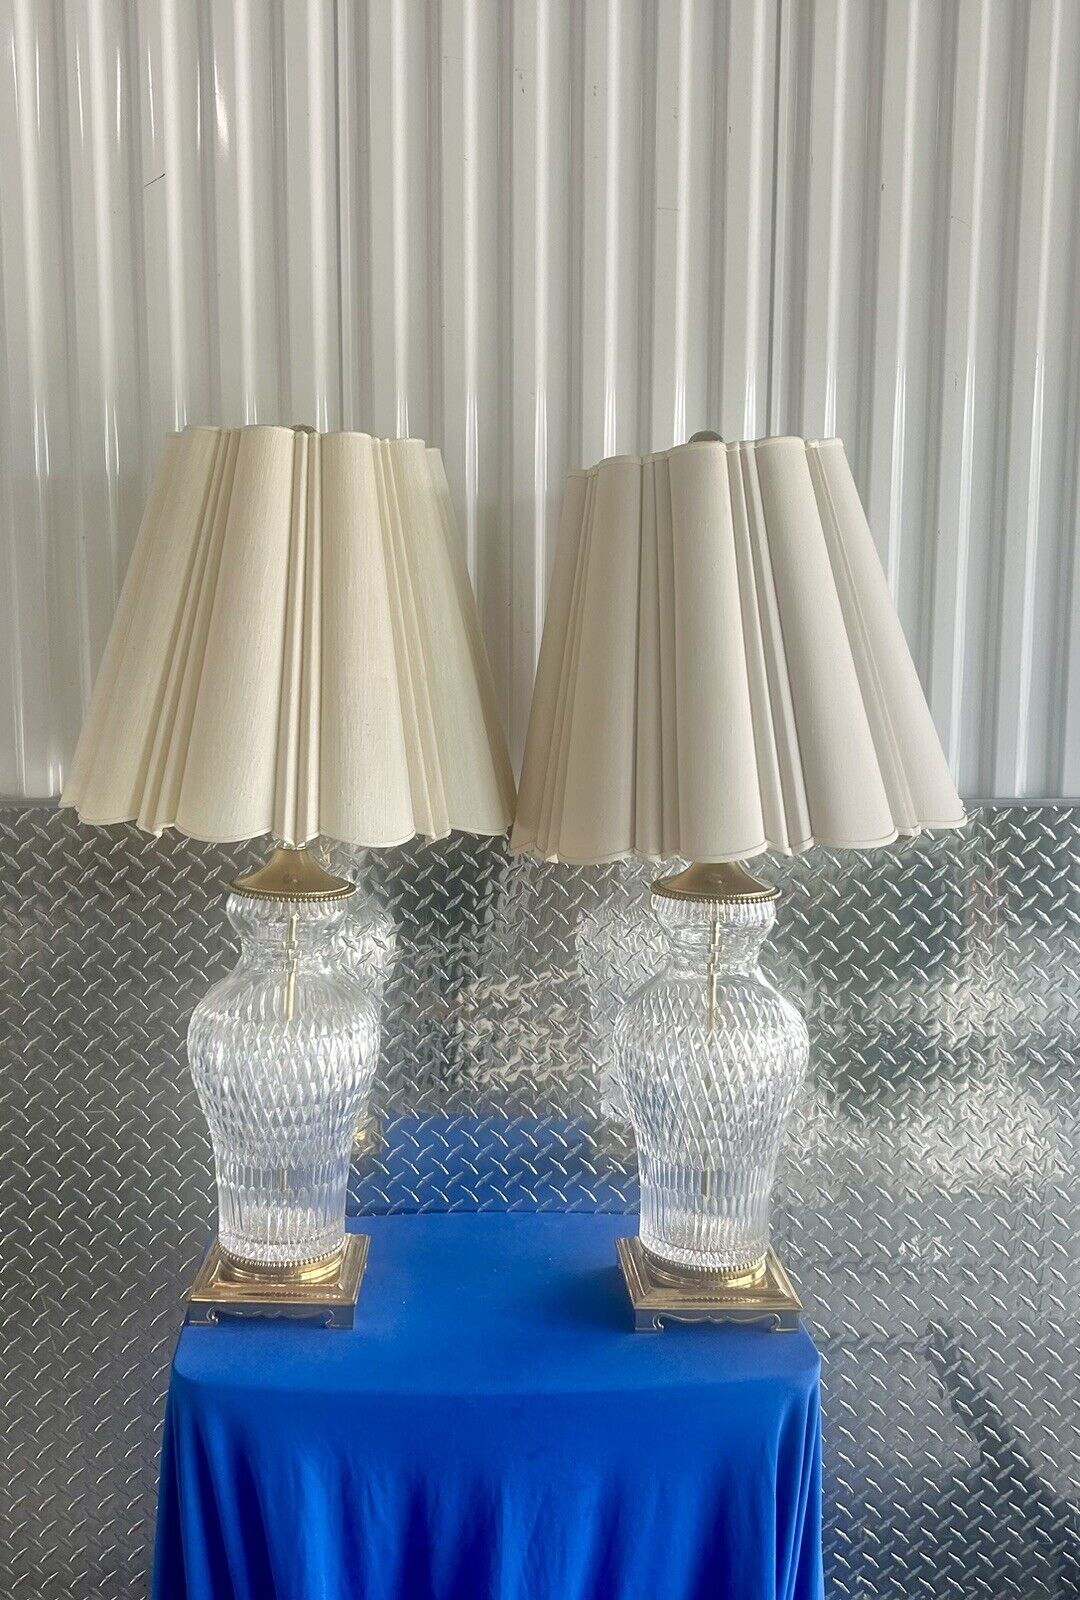 Large Vintage Urn Style Cut Crystal Table Lamp Thumbrint Brass Mounted